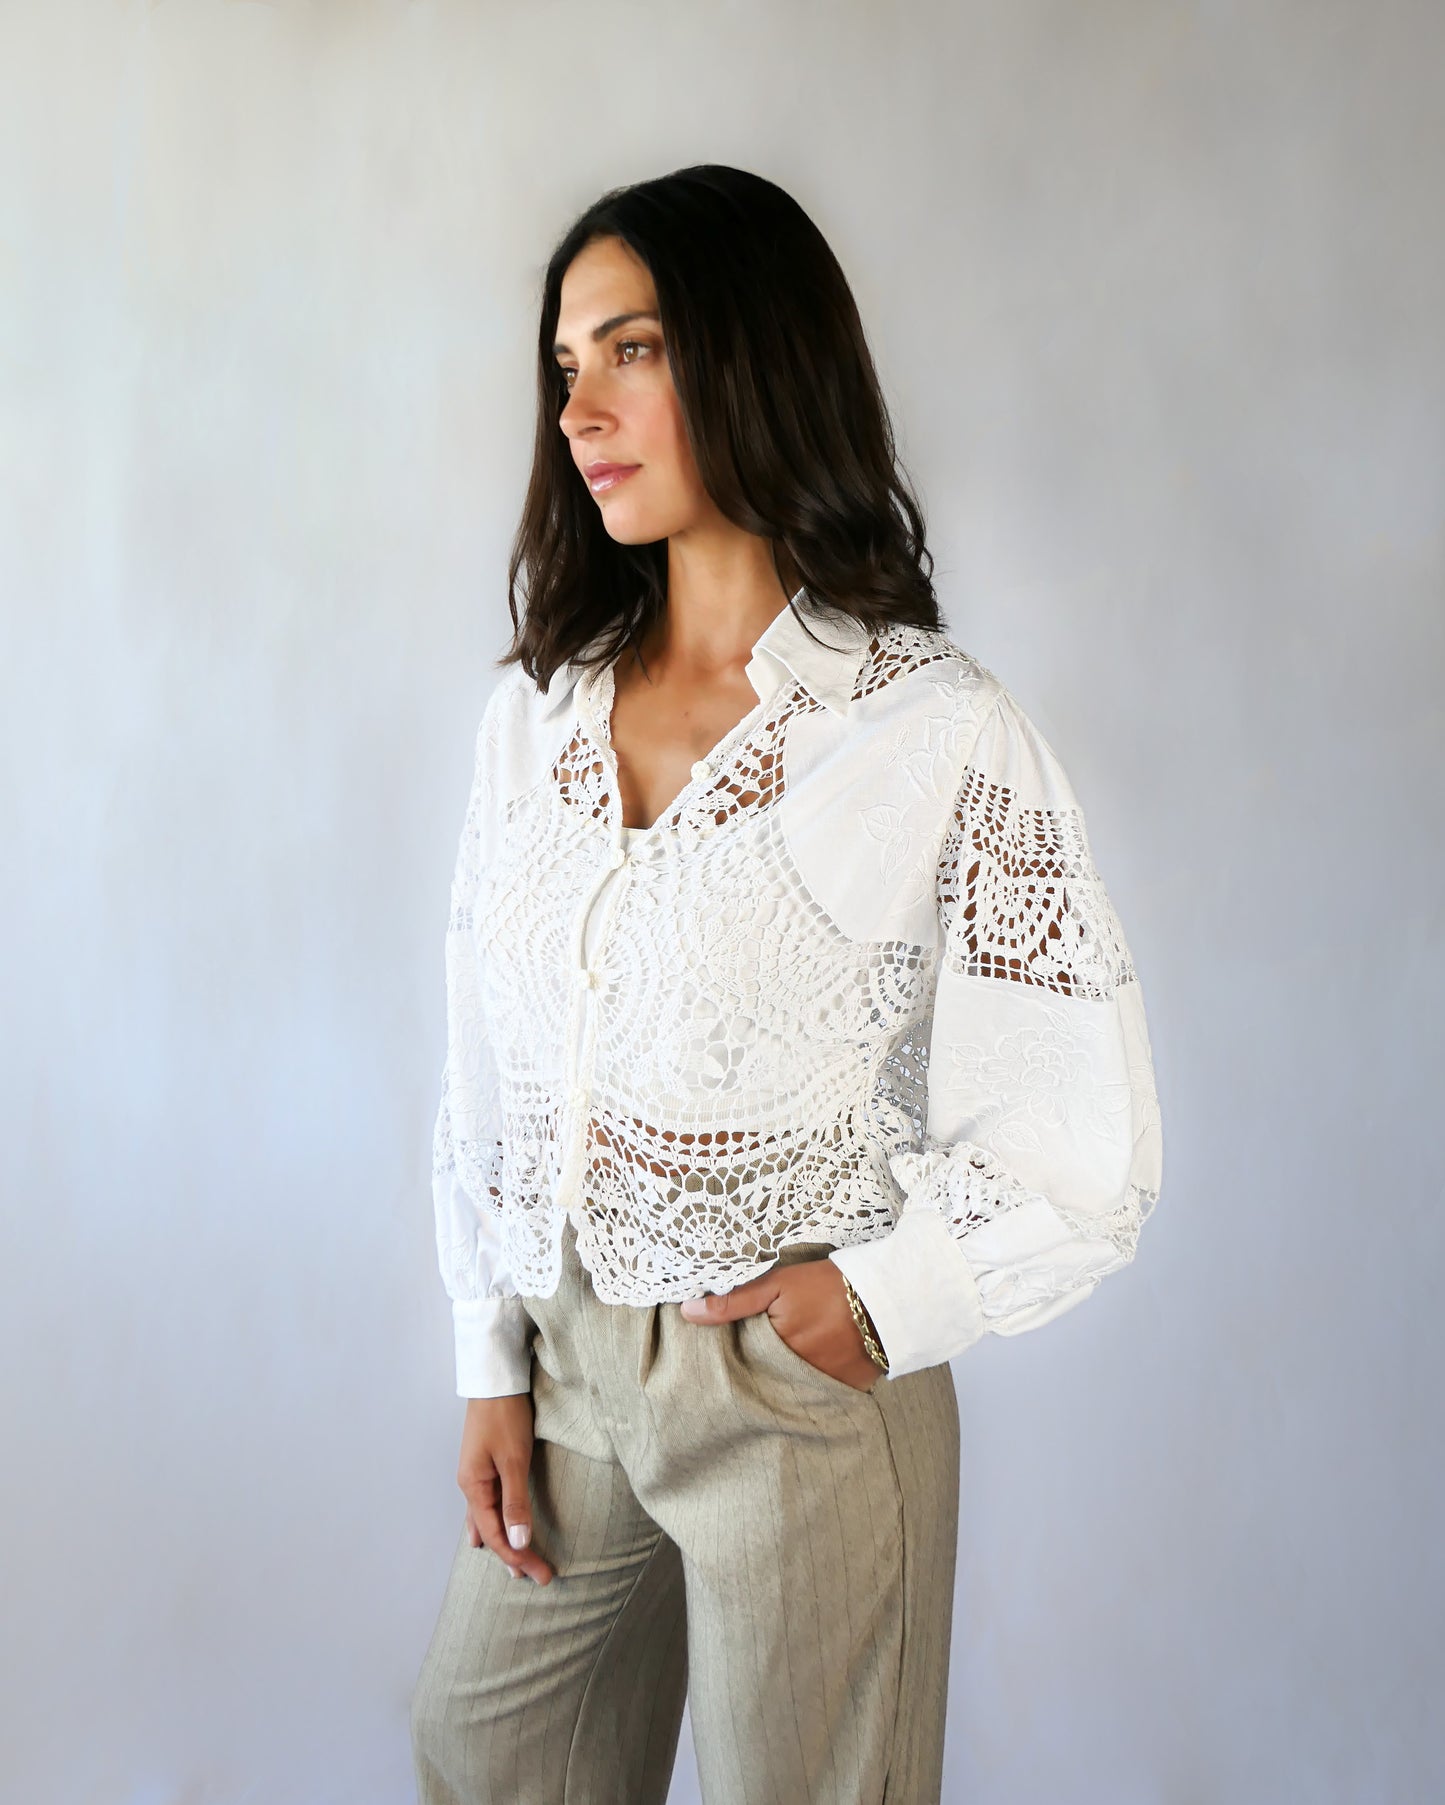 An almost-cropped, lightweight shirt using our vintage Lim's crochet and embroidered cotton fabric, with puff sleeves for a romantic twist. Pair it with high-waisted jeans for casual days, or try it with a flowing midi skirt or wide-legged trousers to dress it up.